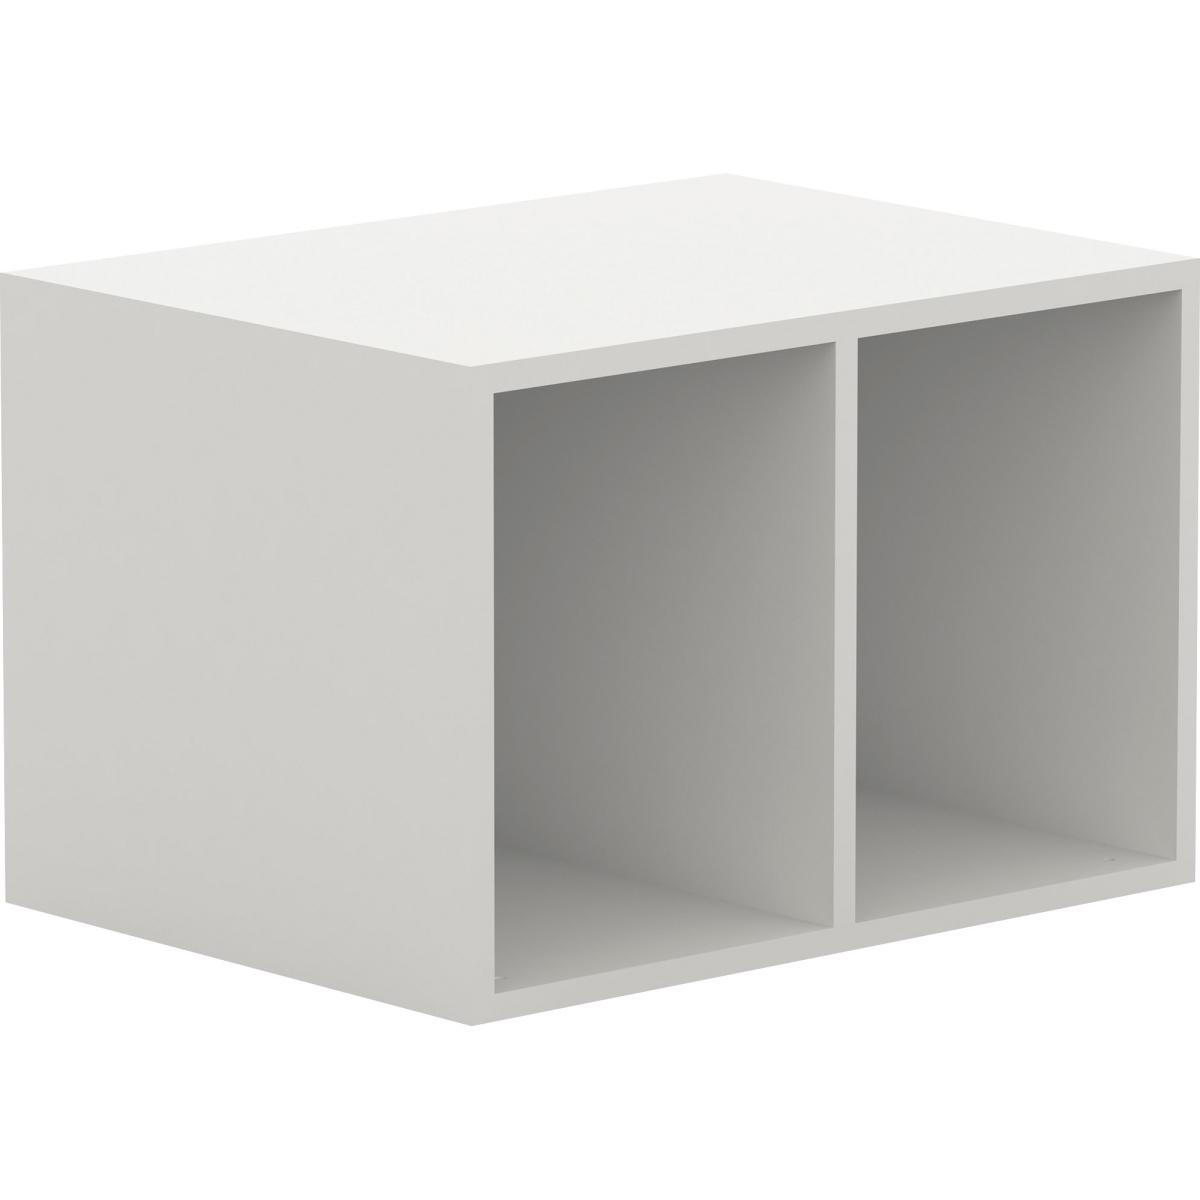 Picture of Lorell LLR42403 11.8 x 17.8 x 15.8 in. Double Cubby Storage Base Adder Unit, White